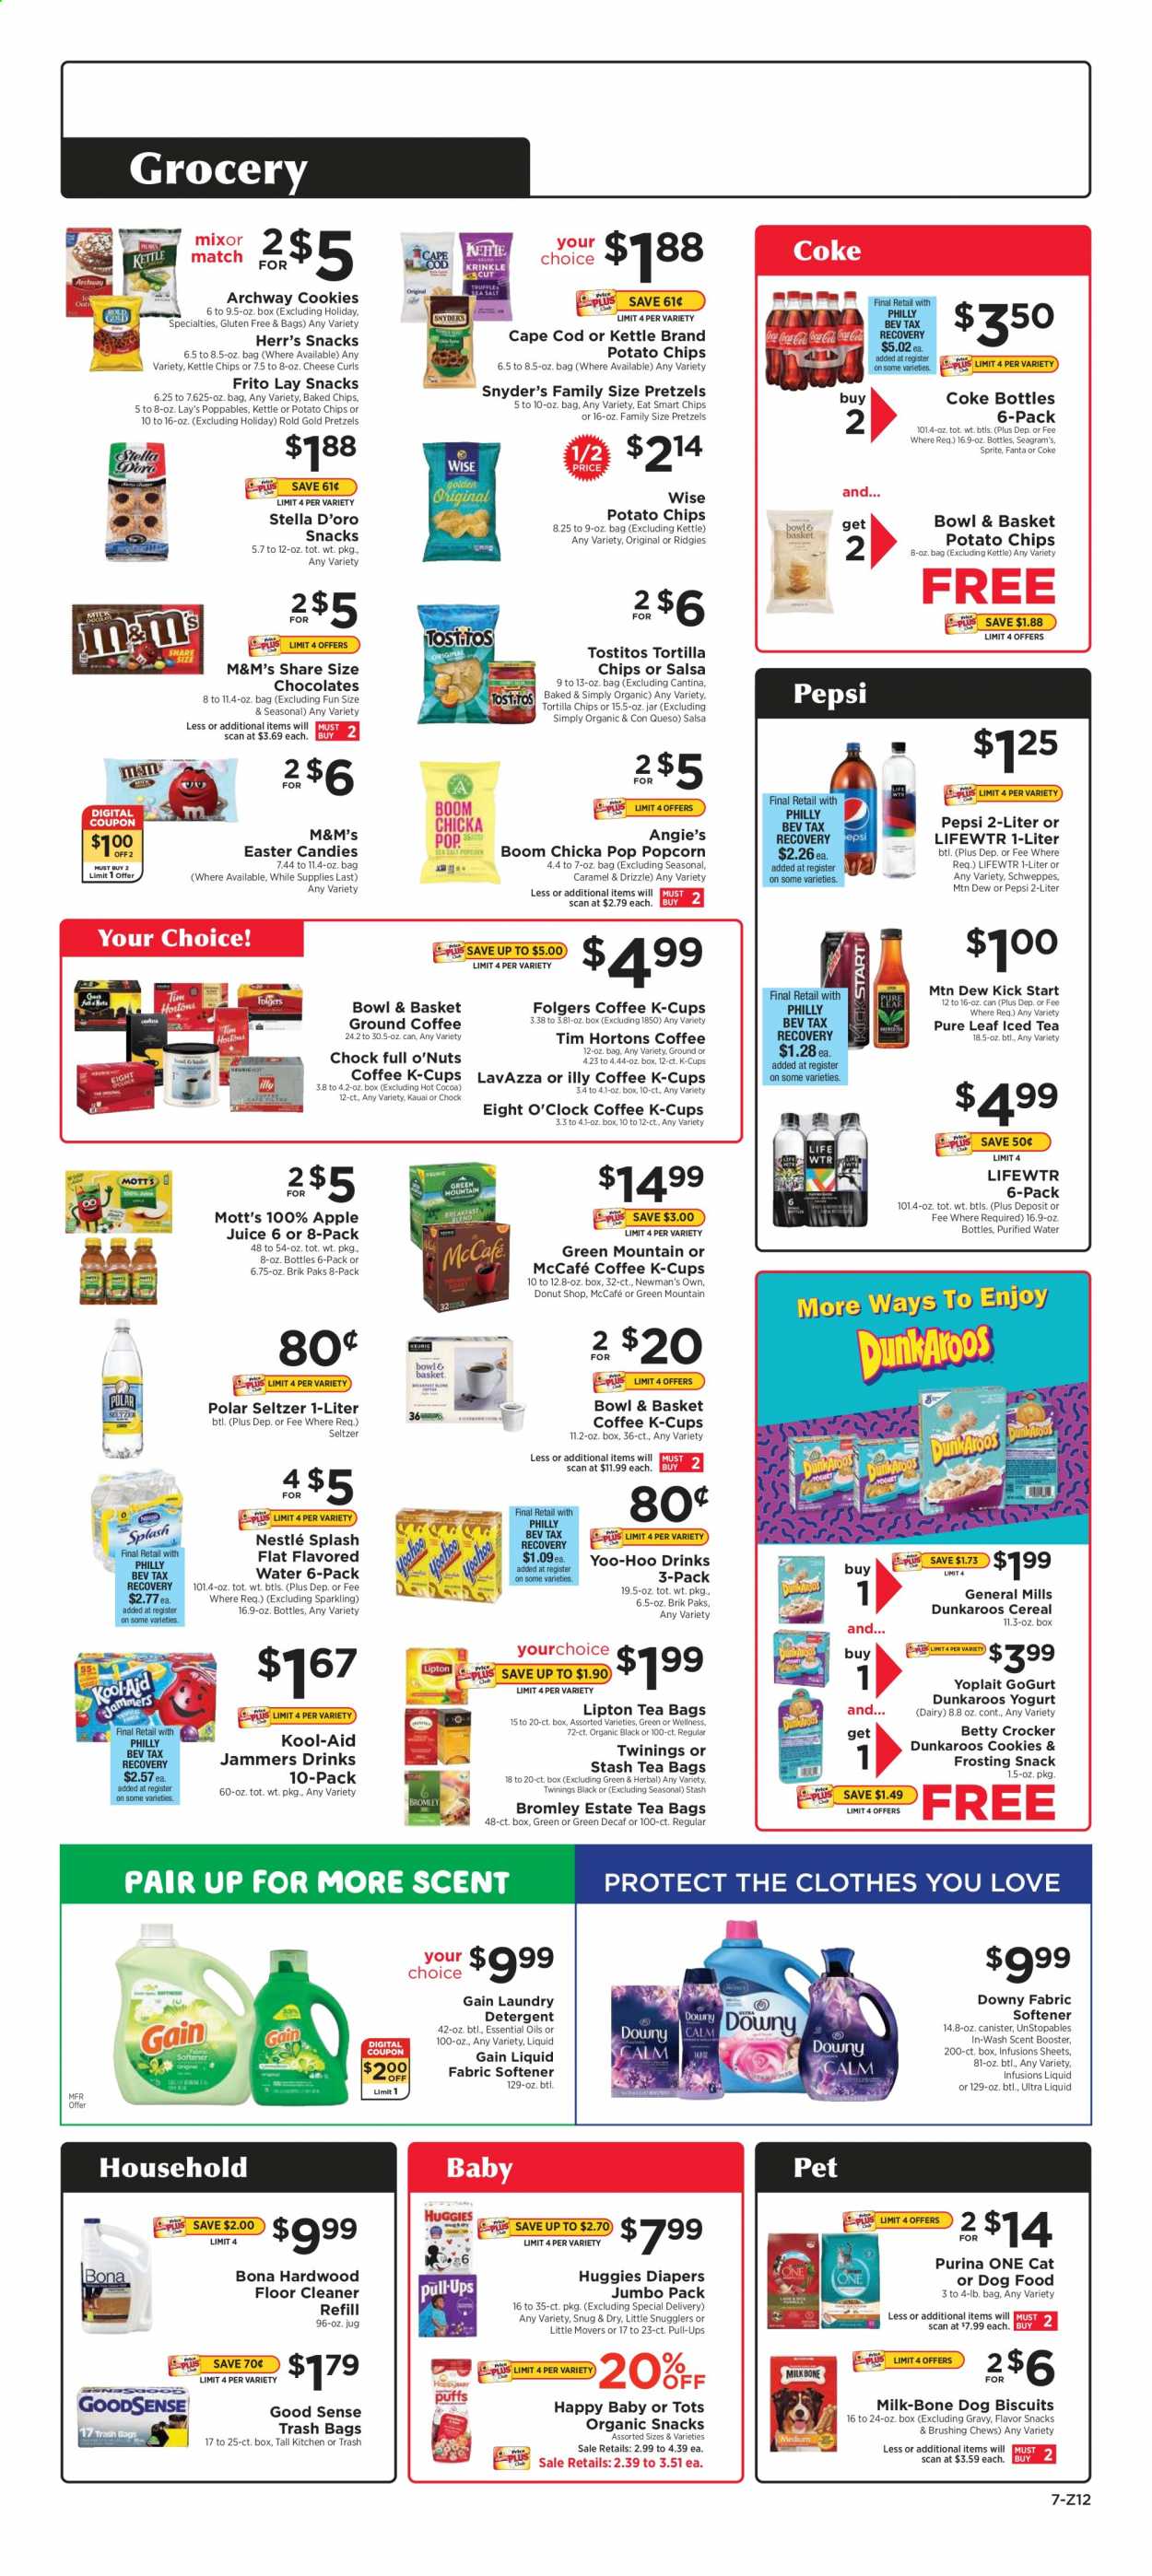 thumbnail - ShopRite Flyer - 02/21/2021 - 02/27/2021 - Sales products - pretzels, puffs, cod, Bowl & Basket, cheese, yoghurt, Yoplait, milk, salsa, cookies, Nestlé, chocolate, M&M's, chewing gum, tortilla chips, potato chips, chips, snack, Lay’s, popcorn, Tostitos, frosting, cereals, caramel, Coca-Cola, Mountain Dew, Schweppes, Sprite, Pepsi, juice, Fanta, Lipton, Mott's, seltzer water, flavored water, purified water, Lifewtr, hot cocoa, tea bags, Twinings, Pure Leaf, coffee, Folgers, ground coffee, coffee capsules, McCafe, K-Cups, Lavazza, Illy, Eight O'Clock, Green Mountain, Huggies, detergent, Gain, cleaner, floor cleaner, Unstopables, fabric softener, laundry detergent, trash bags, bowl, essential oils, animal food, dog food, Purina, dog biscuits. Page 7.